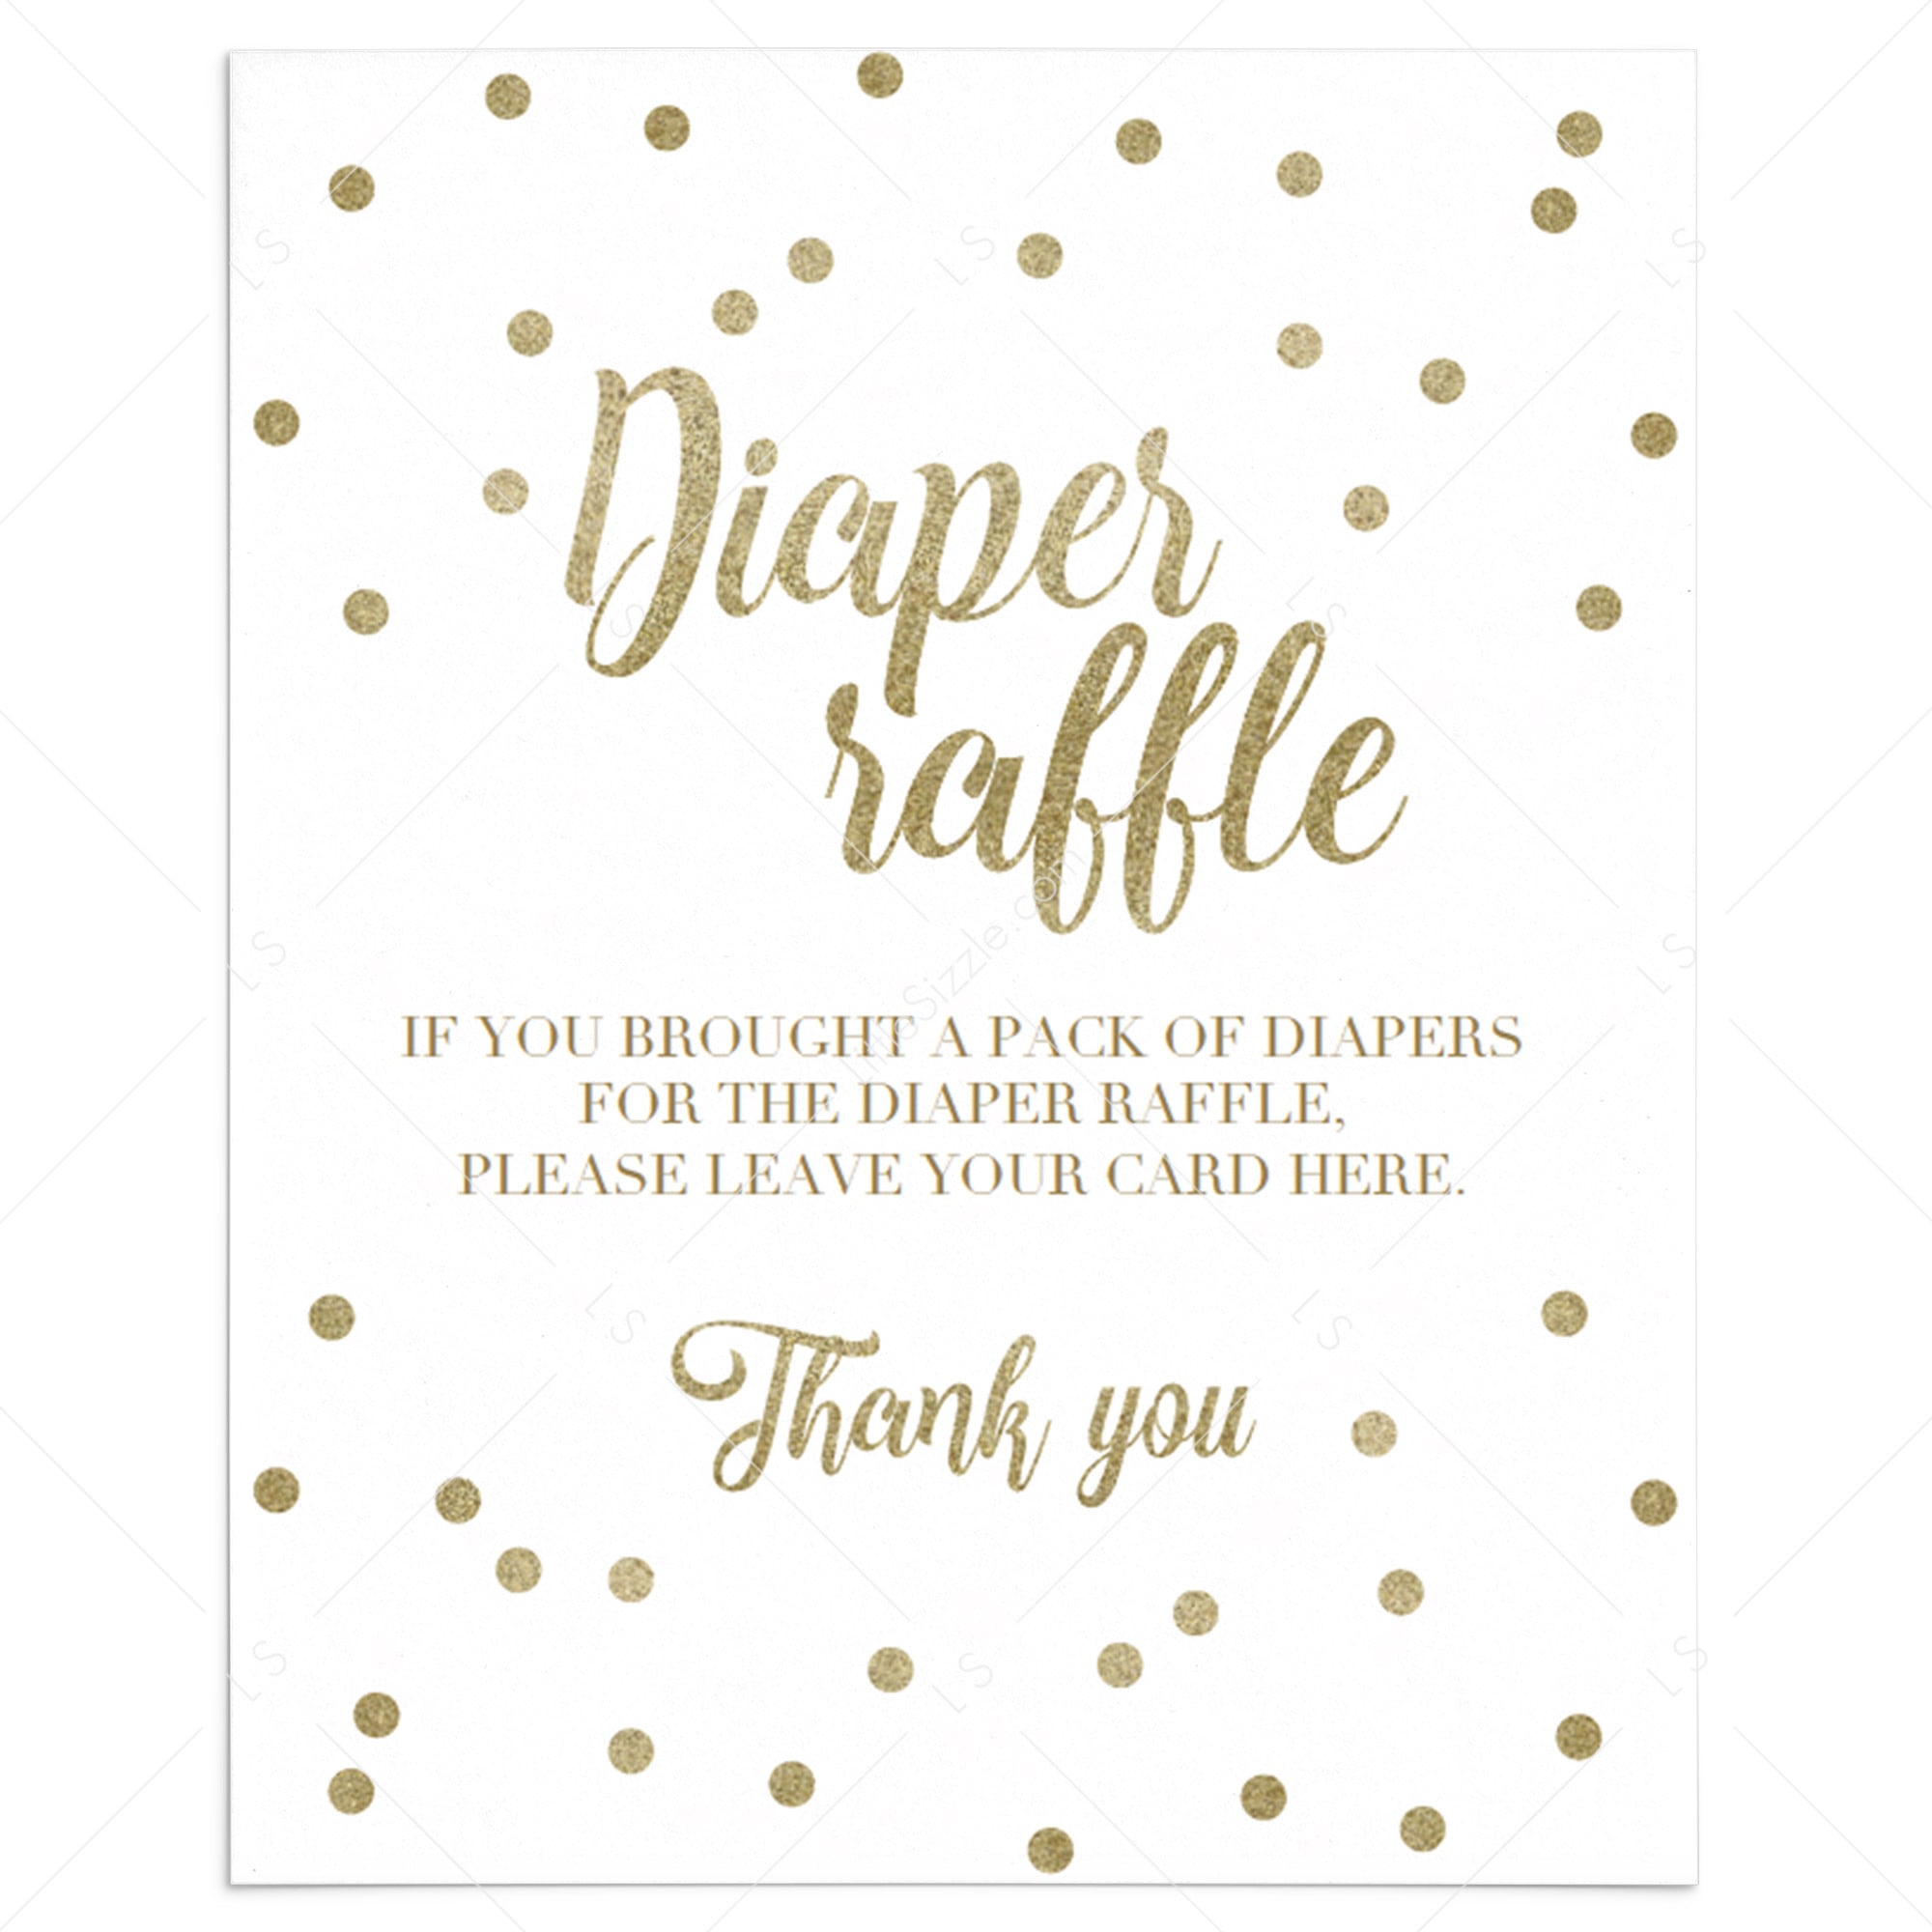 White and gold baby diaper raffle sign printable by LittleSizzle